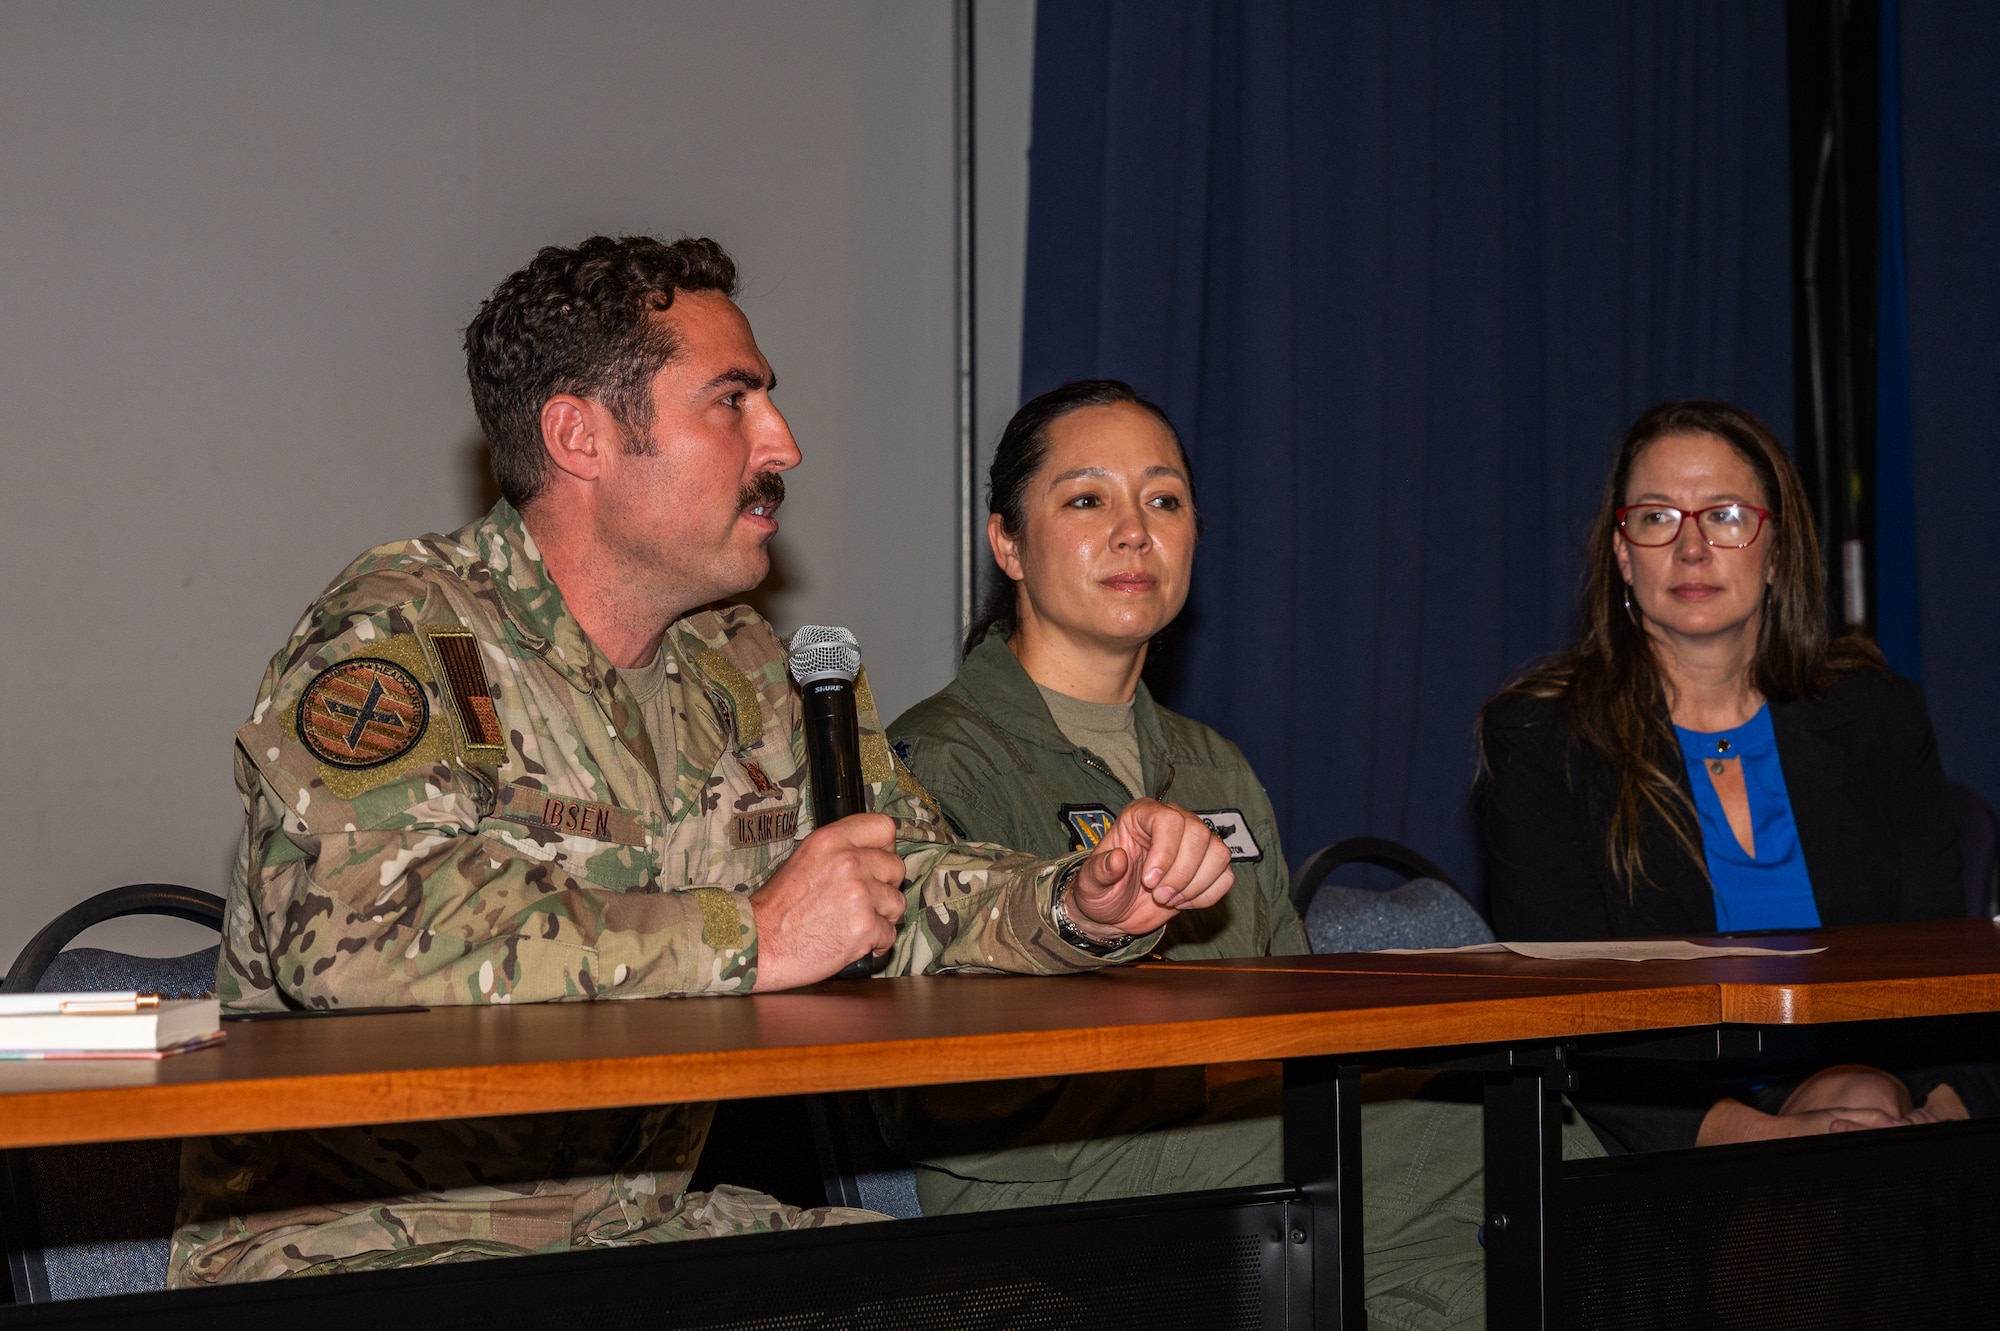 A U.S. Military members sits at a table holding a microphone and speaking.